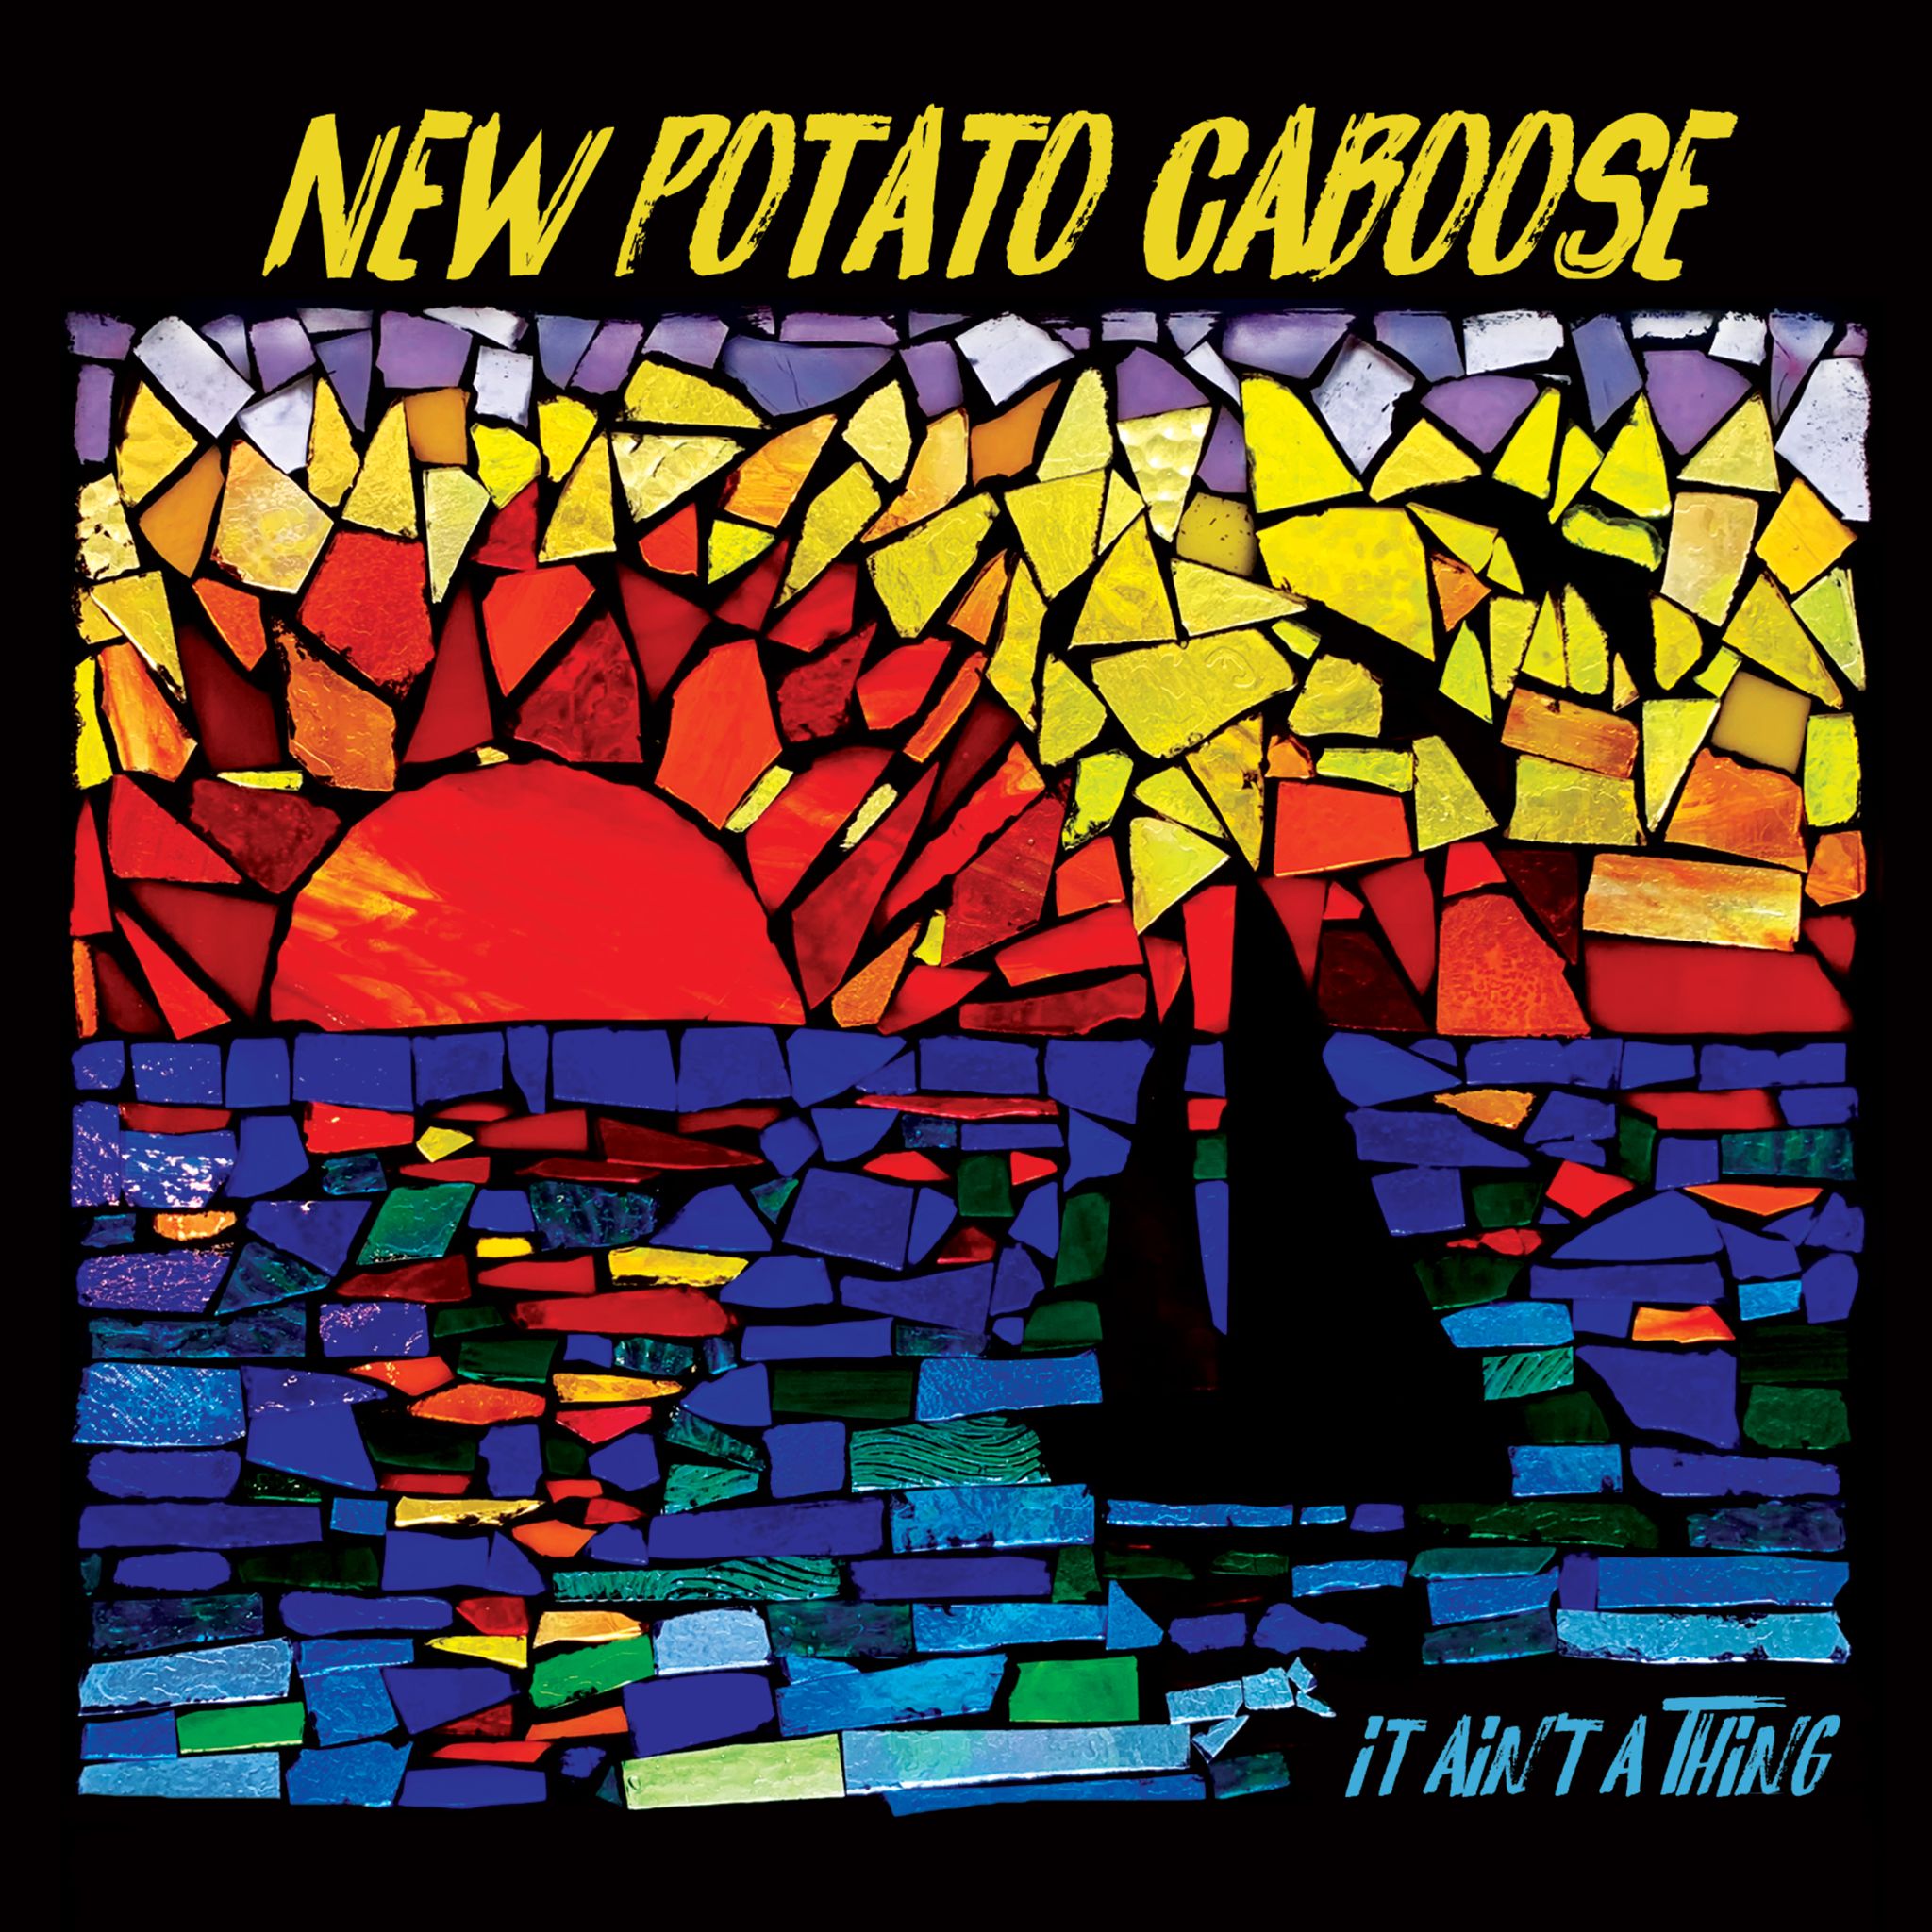 New Potato Caboose Release Their New Album ‘It Ain’t a Thing’